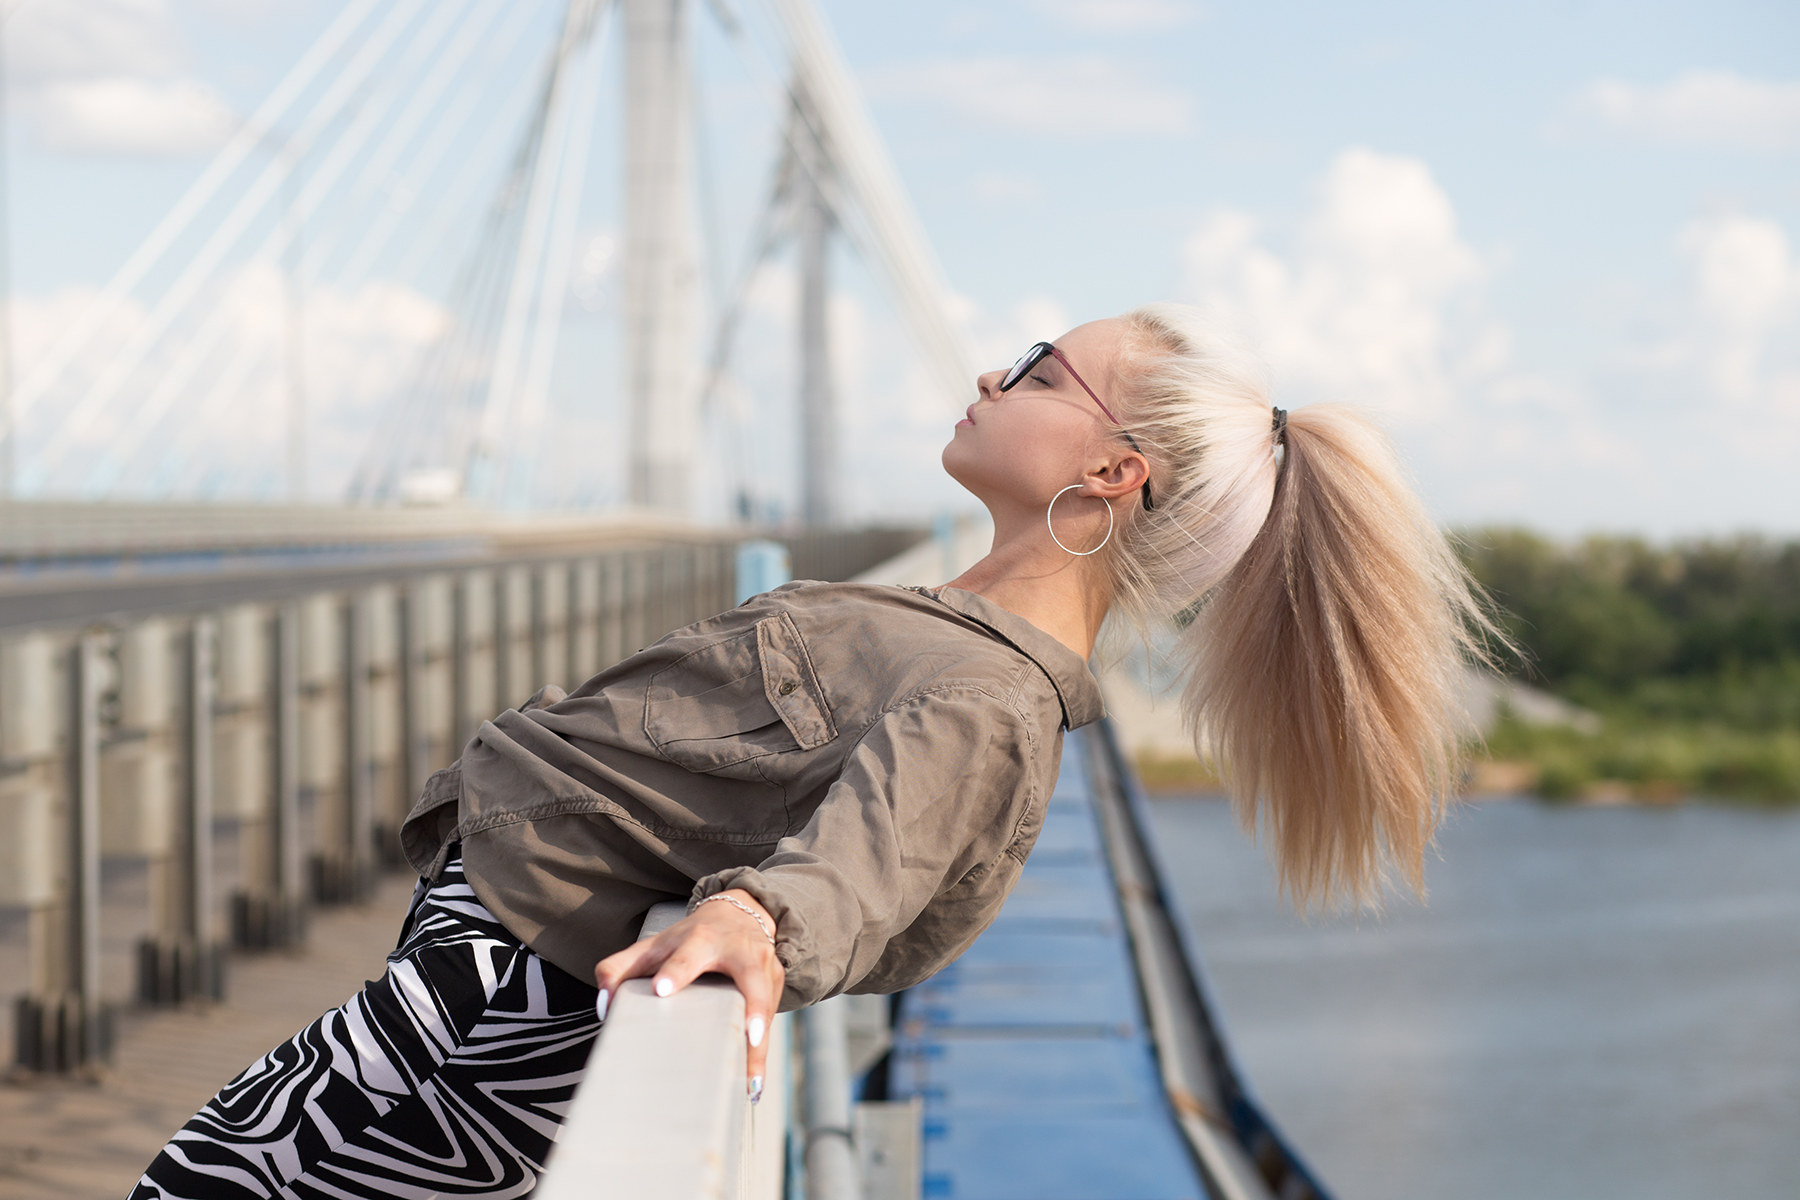 People 1800x1200 women model blonde ponytail shirt pants outdoors depth of field women with glasses glasses hoop earrings closed eyes profile side view painted nails white nails bridge portrait arched back women outdoors Aleksey Lozgachev windy